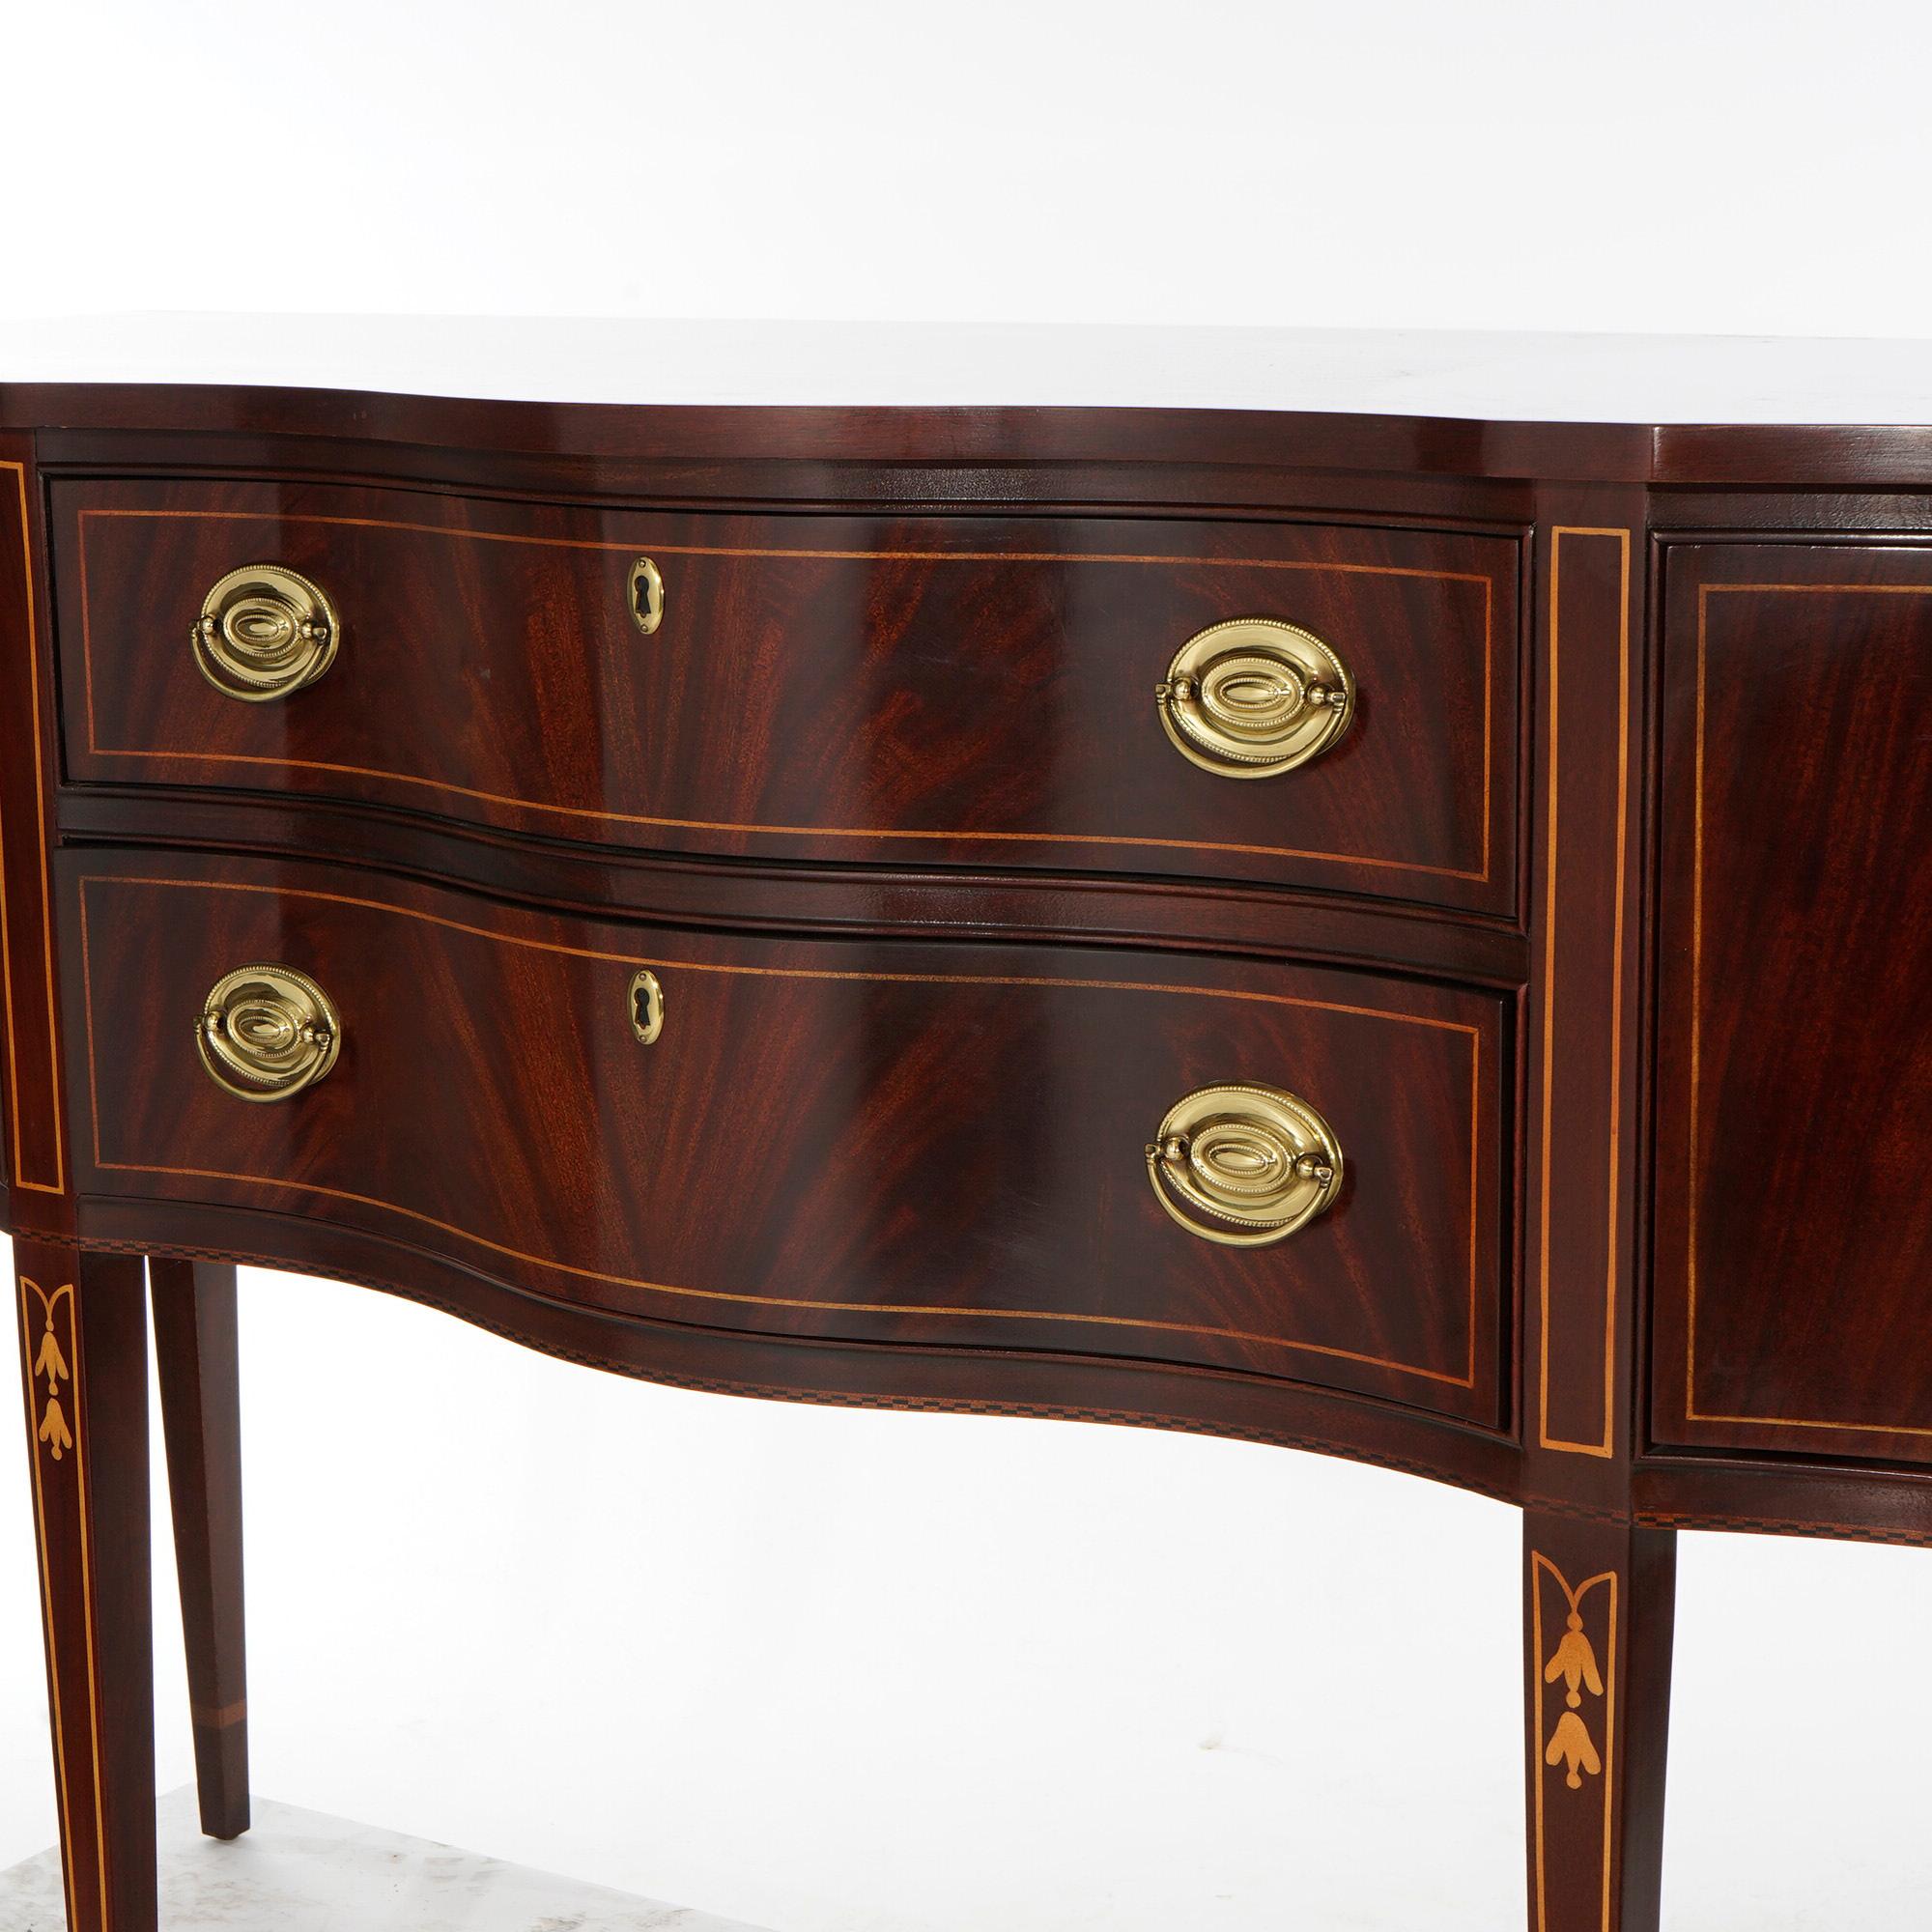 A Hepplewhite style sideboard by Drexel Heritage offers flame mahogany construction in serpentine form with central drawers and flanking cabinets, raised on straight tapered legs, satinwood inlaid banding throughout, maker mark on drawer interior as